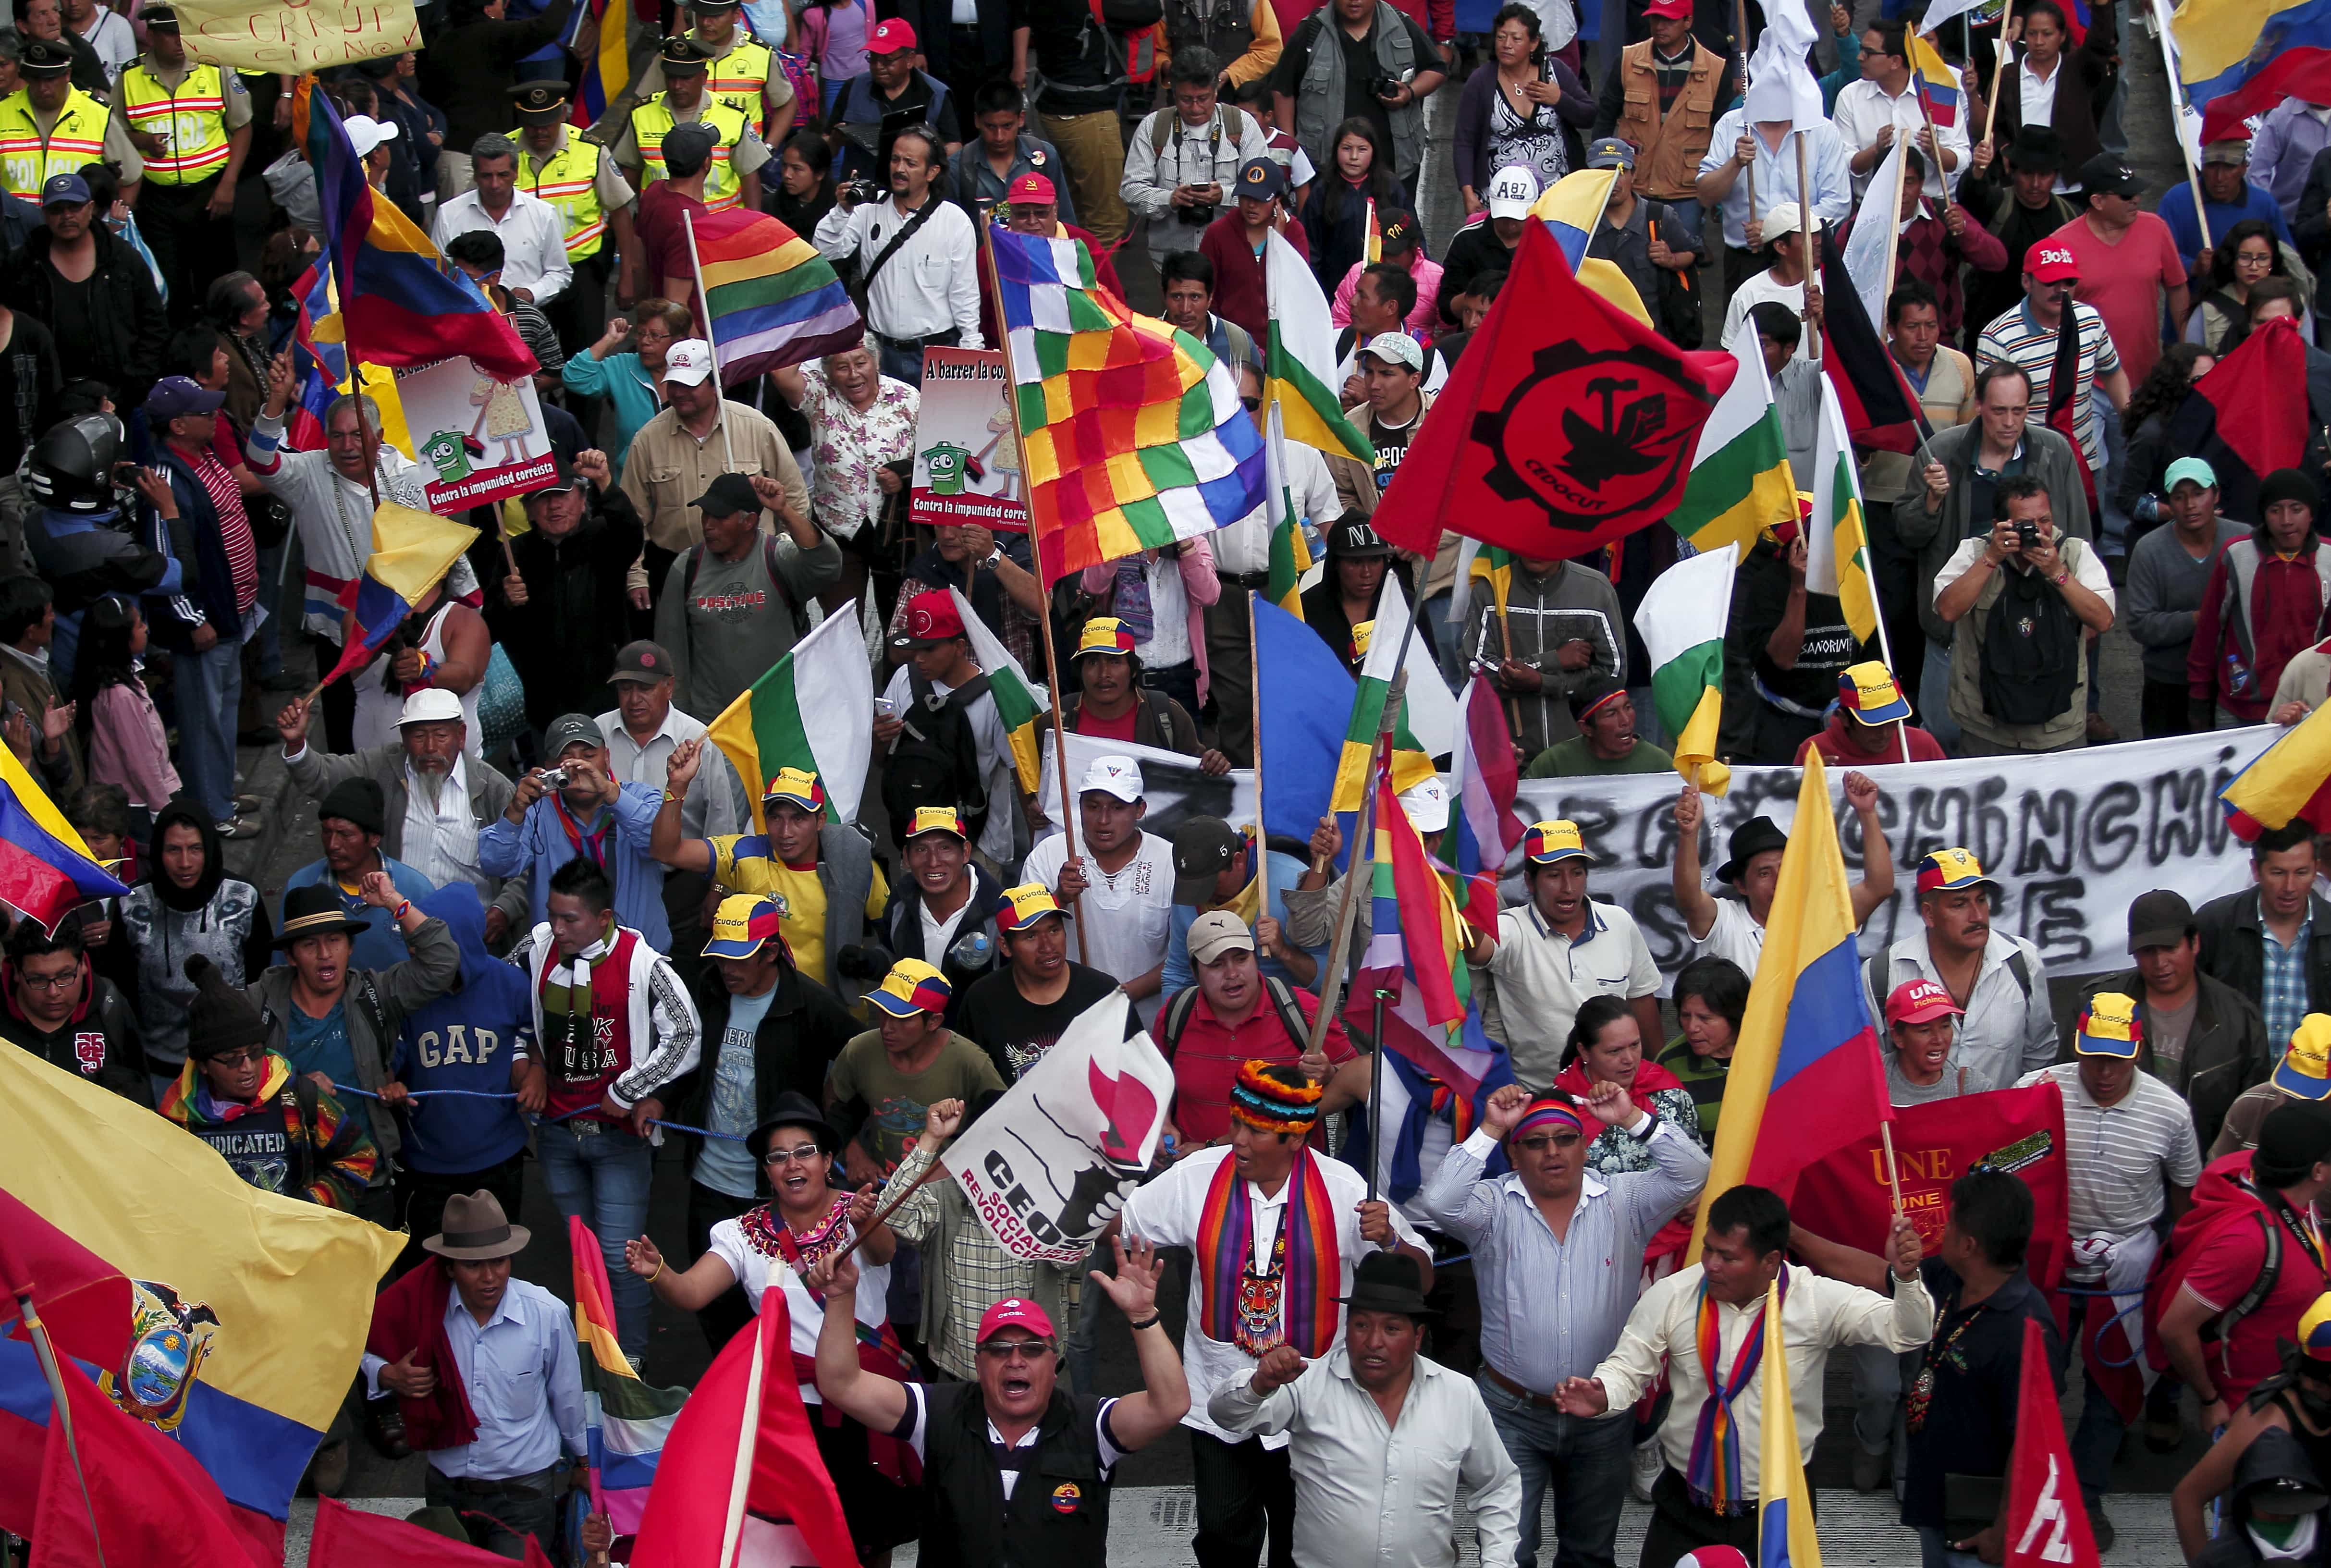 Protesters carry flags and banners while marching in Quito, Ecuador, August 12, 2015, REUTERS/Guillermo Granja